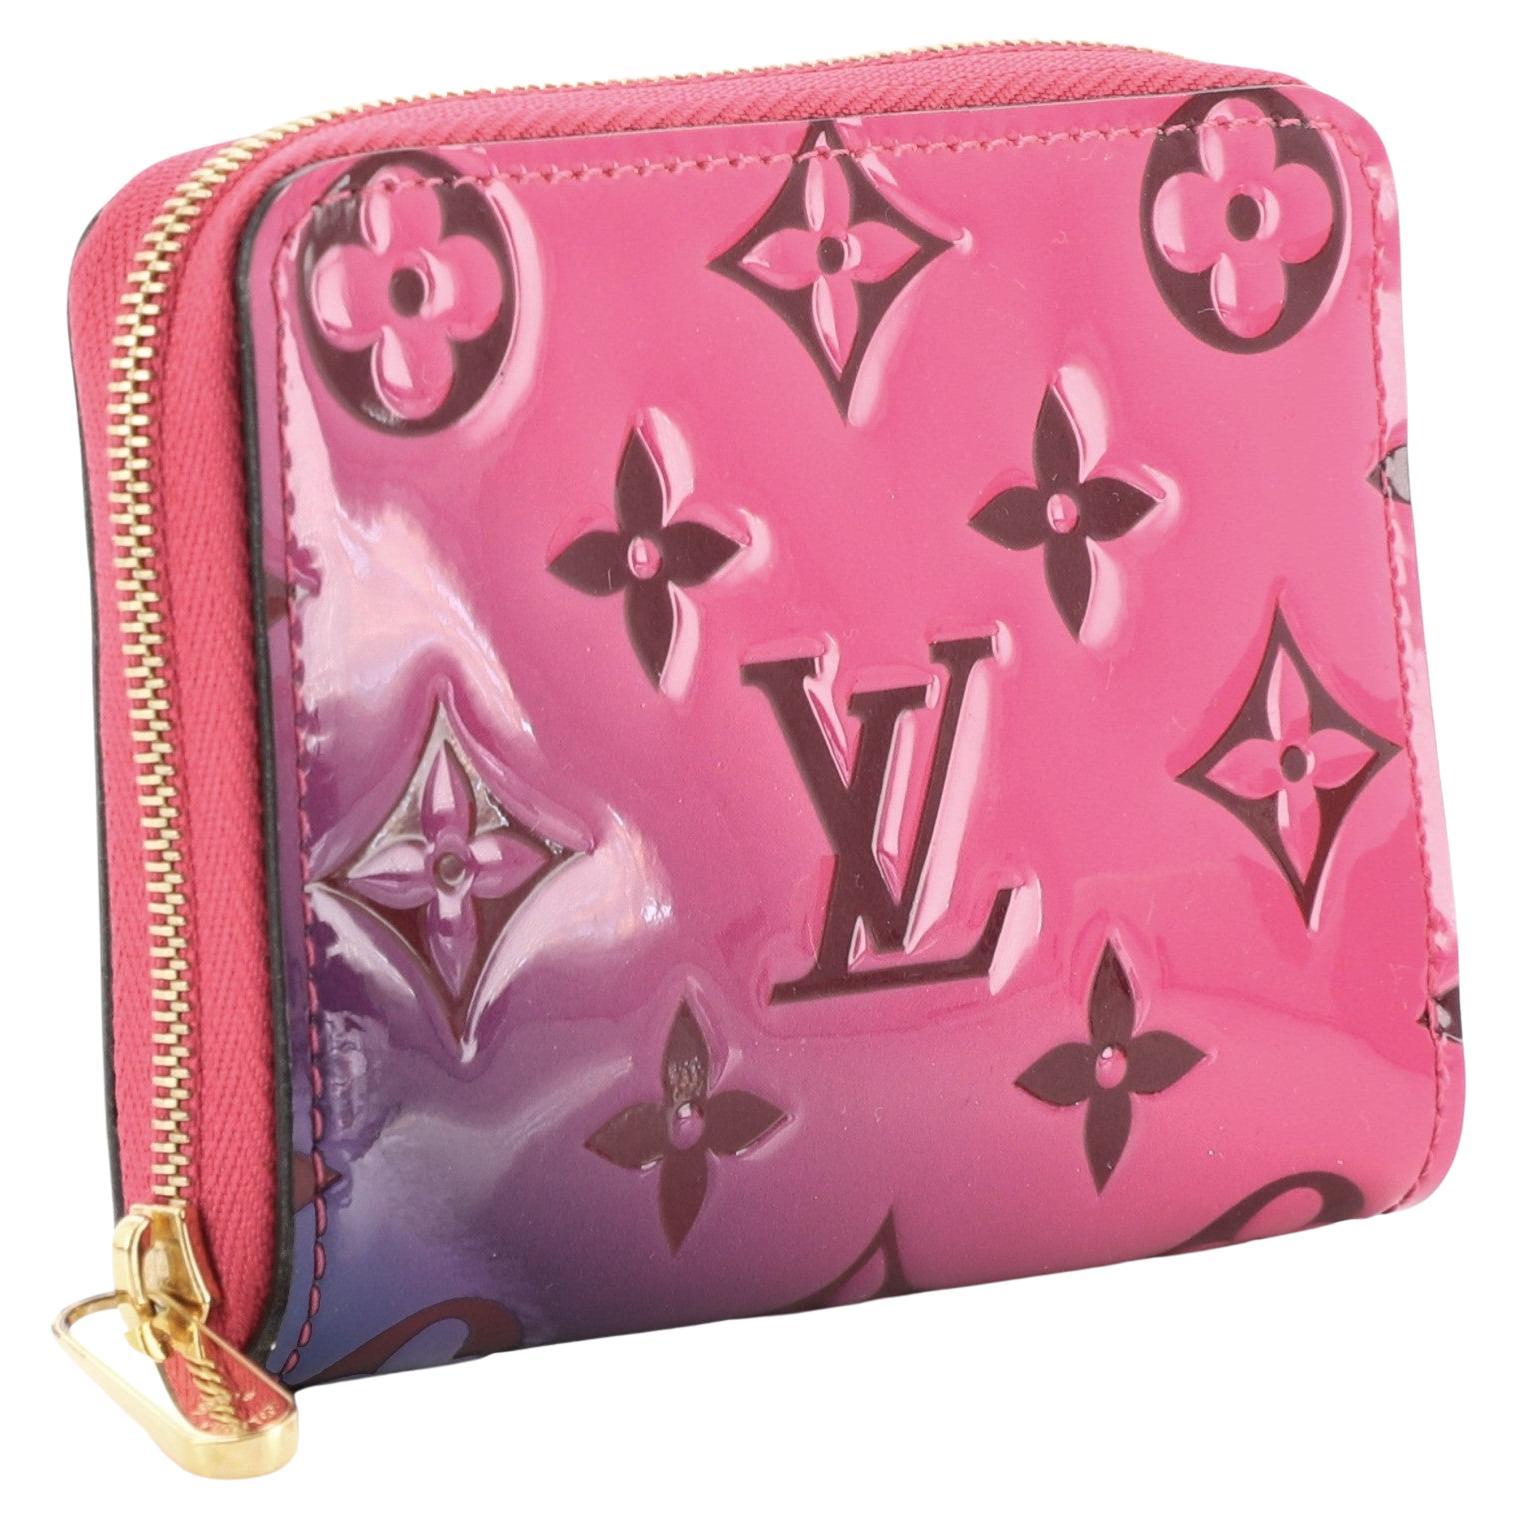 Louis Vuitton Fuchsia Vernis Patent Leather Card Wallet - The Palm